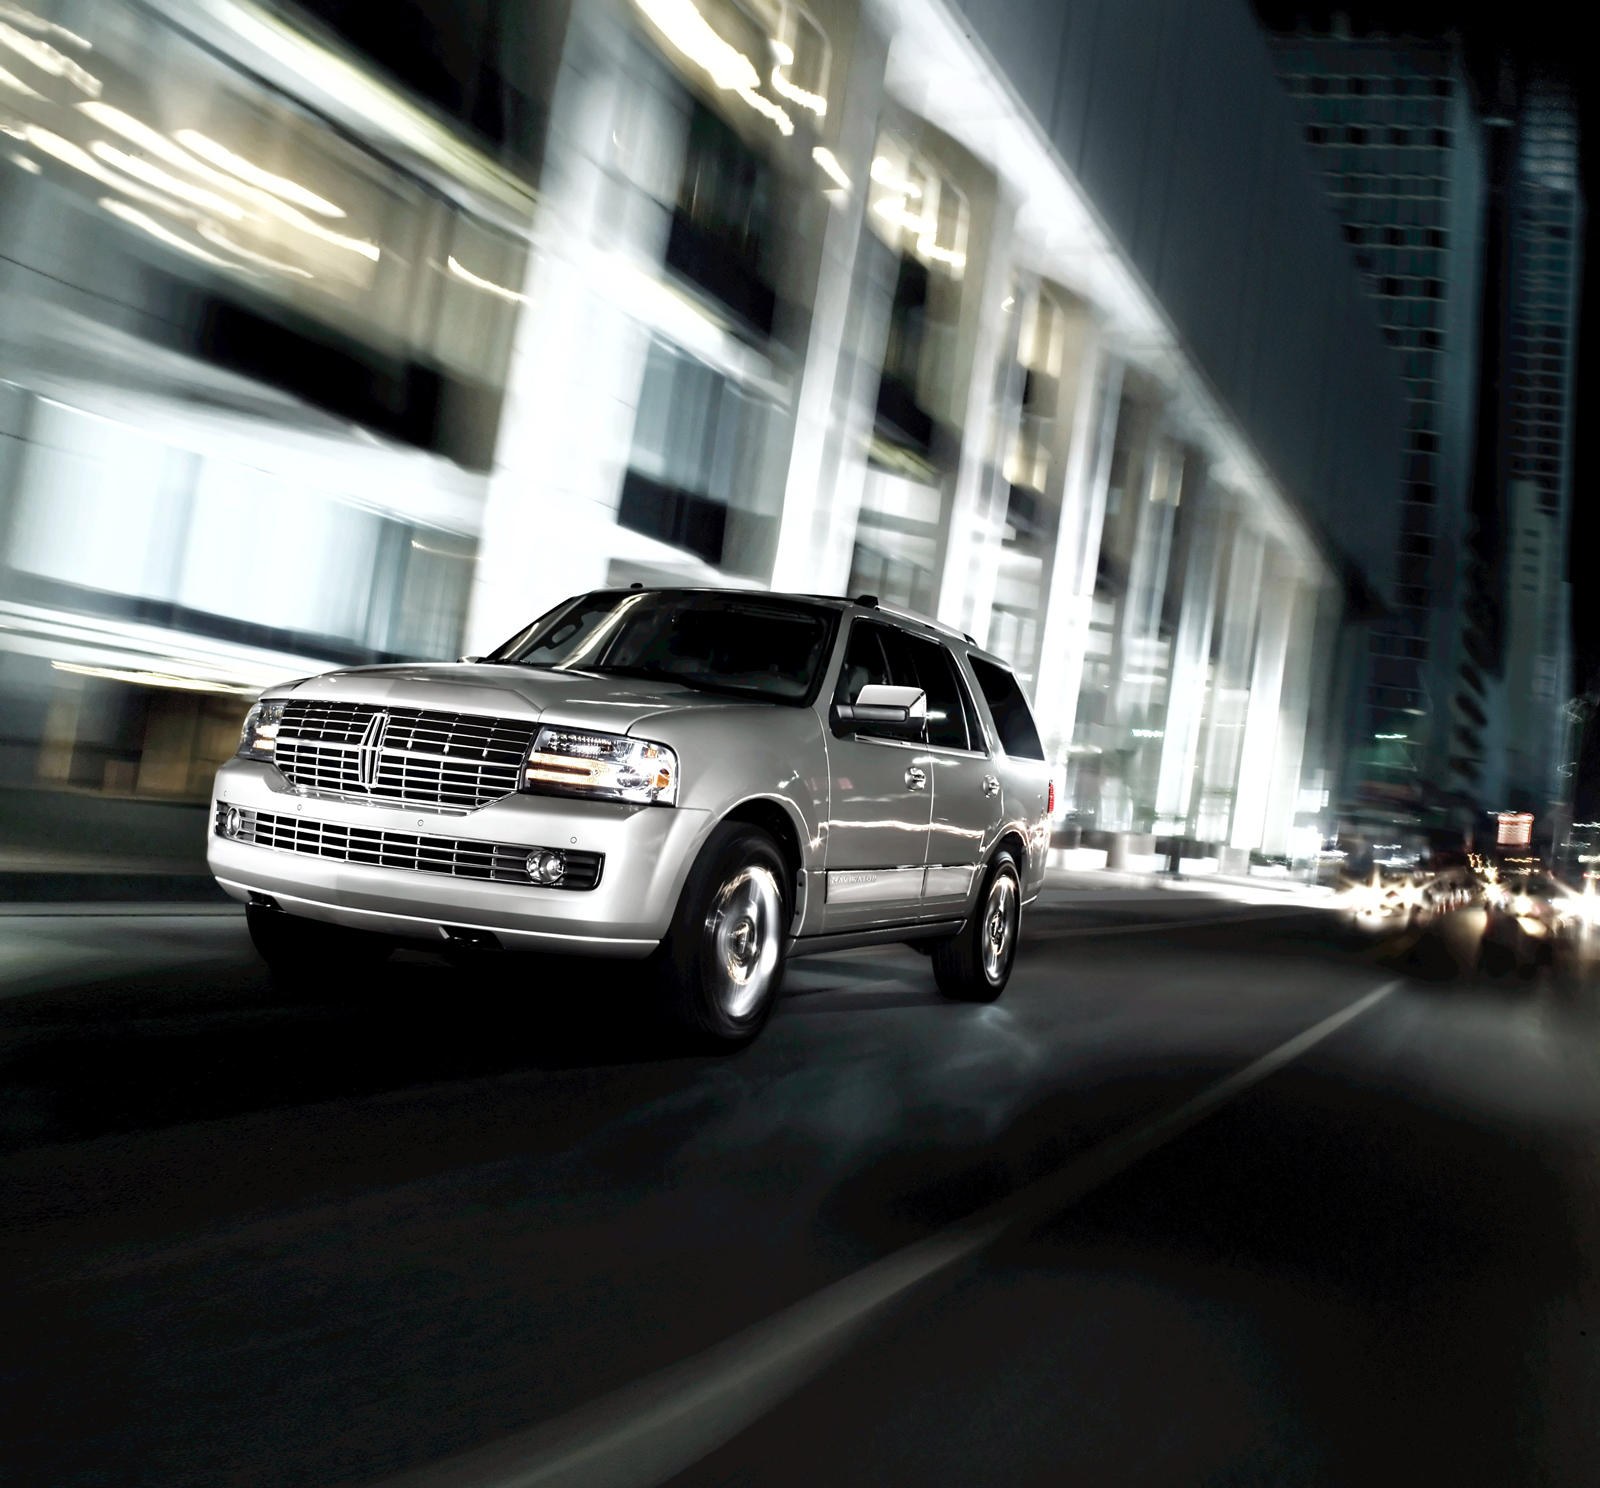 2010 Lincoln Navigator Front View Driving